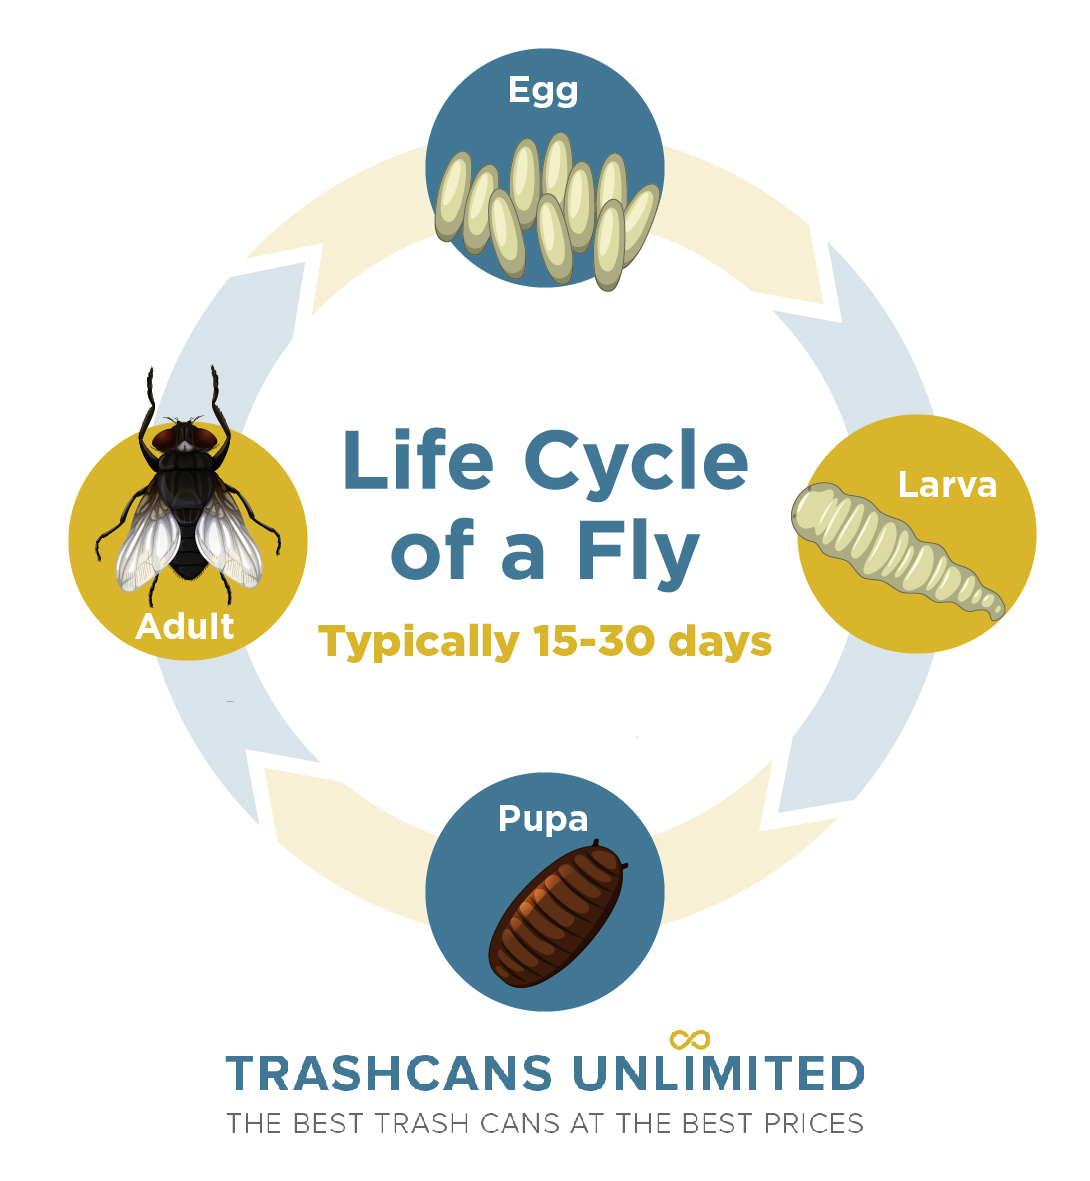 https://trashcansunlimited.com/product_images/uploaded_images/infographic-life-cycle-of-a-fly.jpg